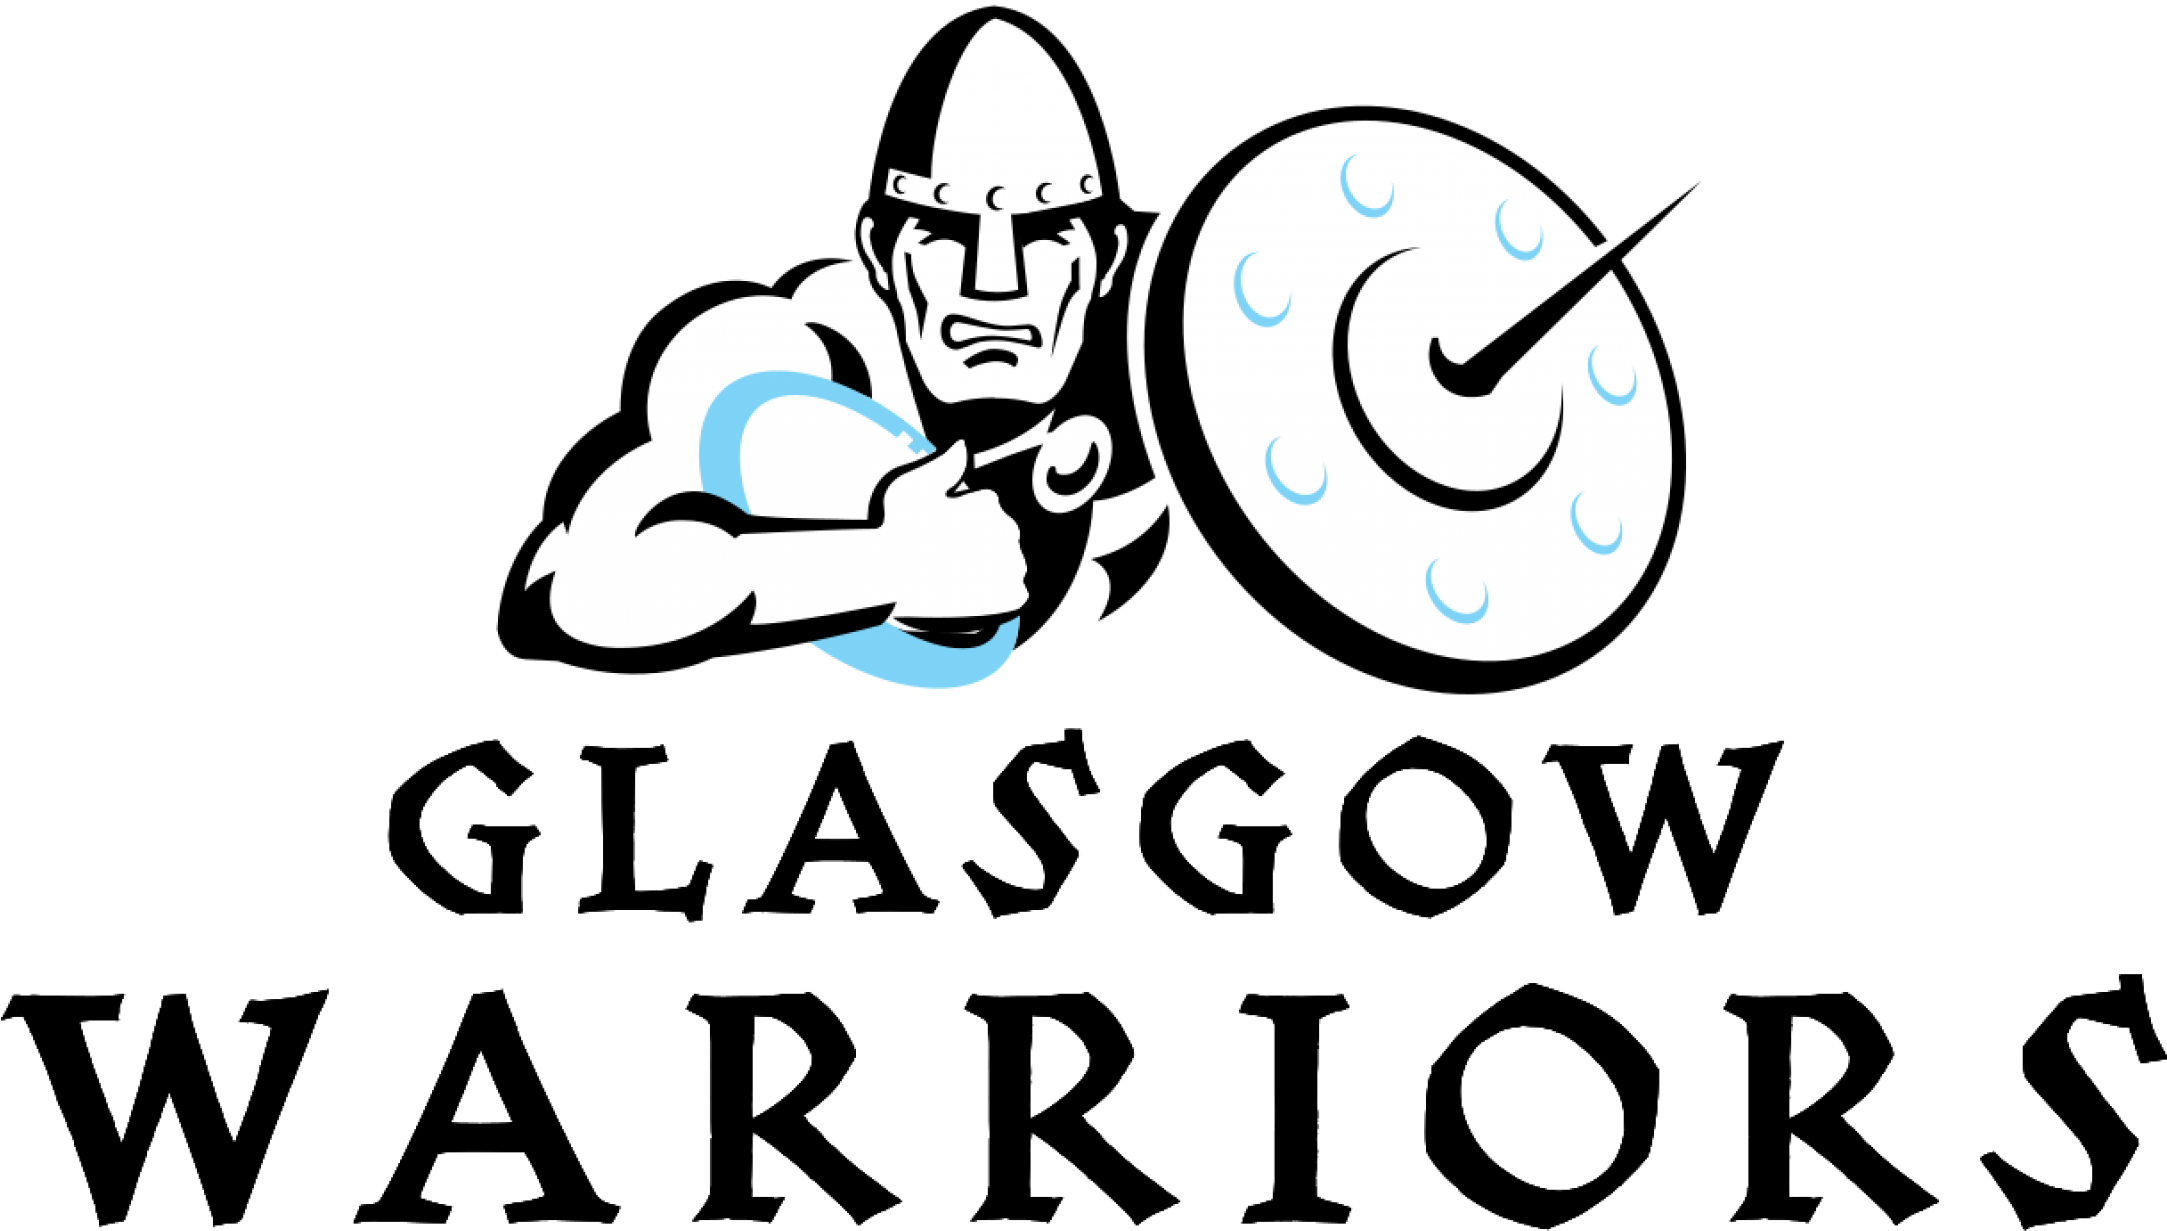 Cardiff Blues Welcome Glasgow Warriors To The Arms - Glasgow Warriors Rugby Logo (2280x1284)